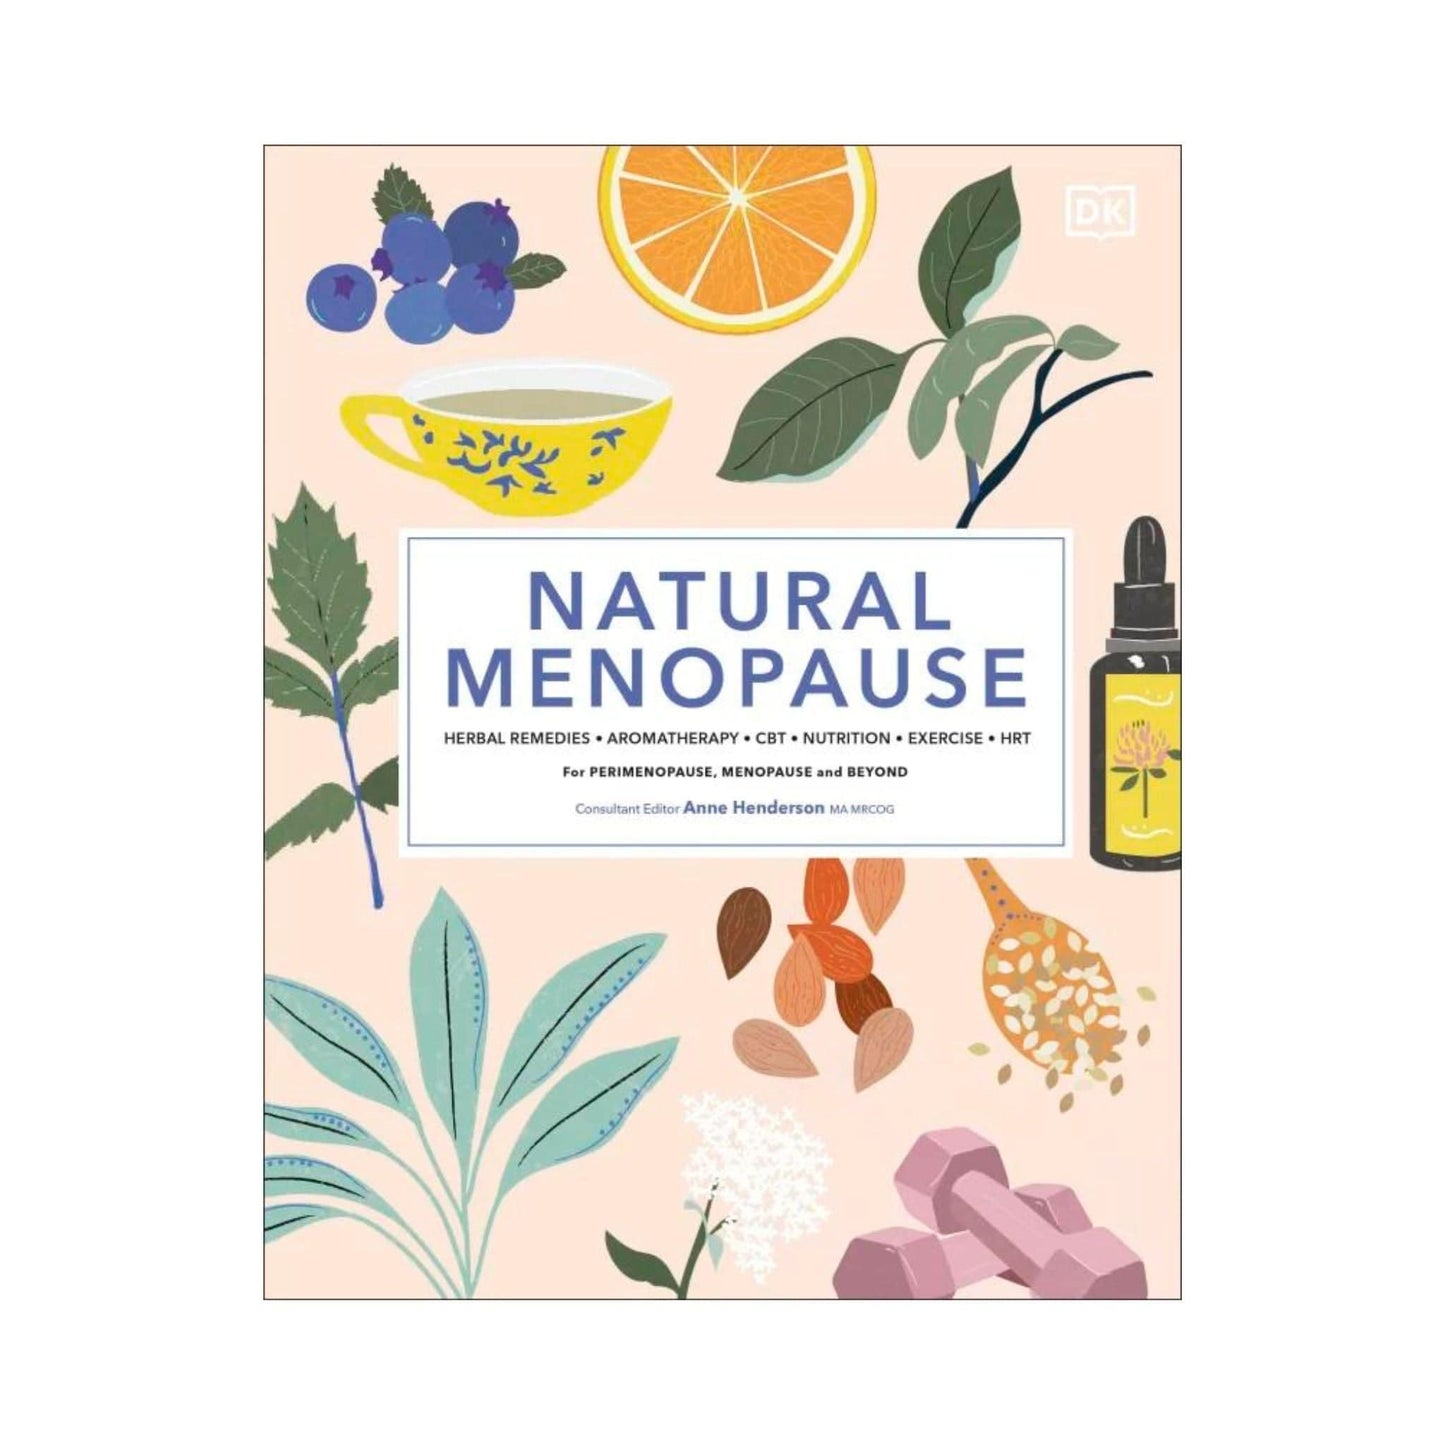 Our Bookshelf Print Books Natural Menopause - Herbal Remedies, Aromatherapy, CBT, Nutrition, Exercise, HRT - for Perimenopause, Menopause, and Beyond